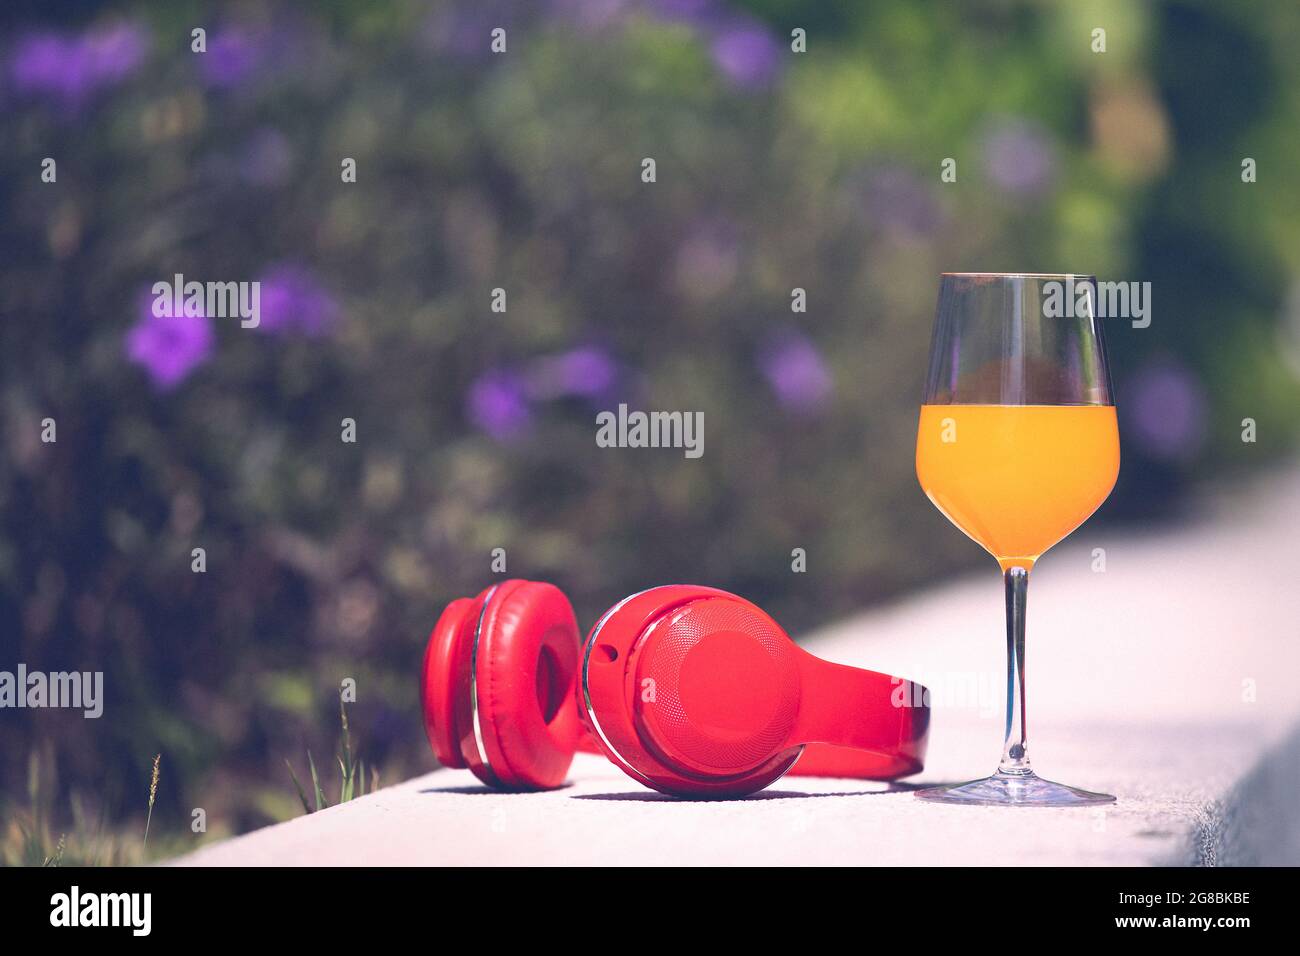 Glass of orange juice and red headphone on edge of swimming pool with blur flower and green tree in background. Copyspace on the left, process in vint Stock Photo